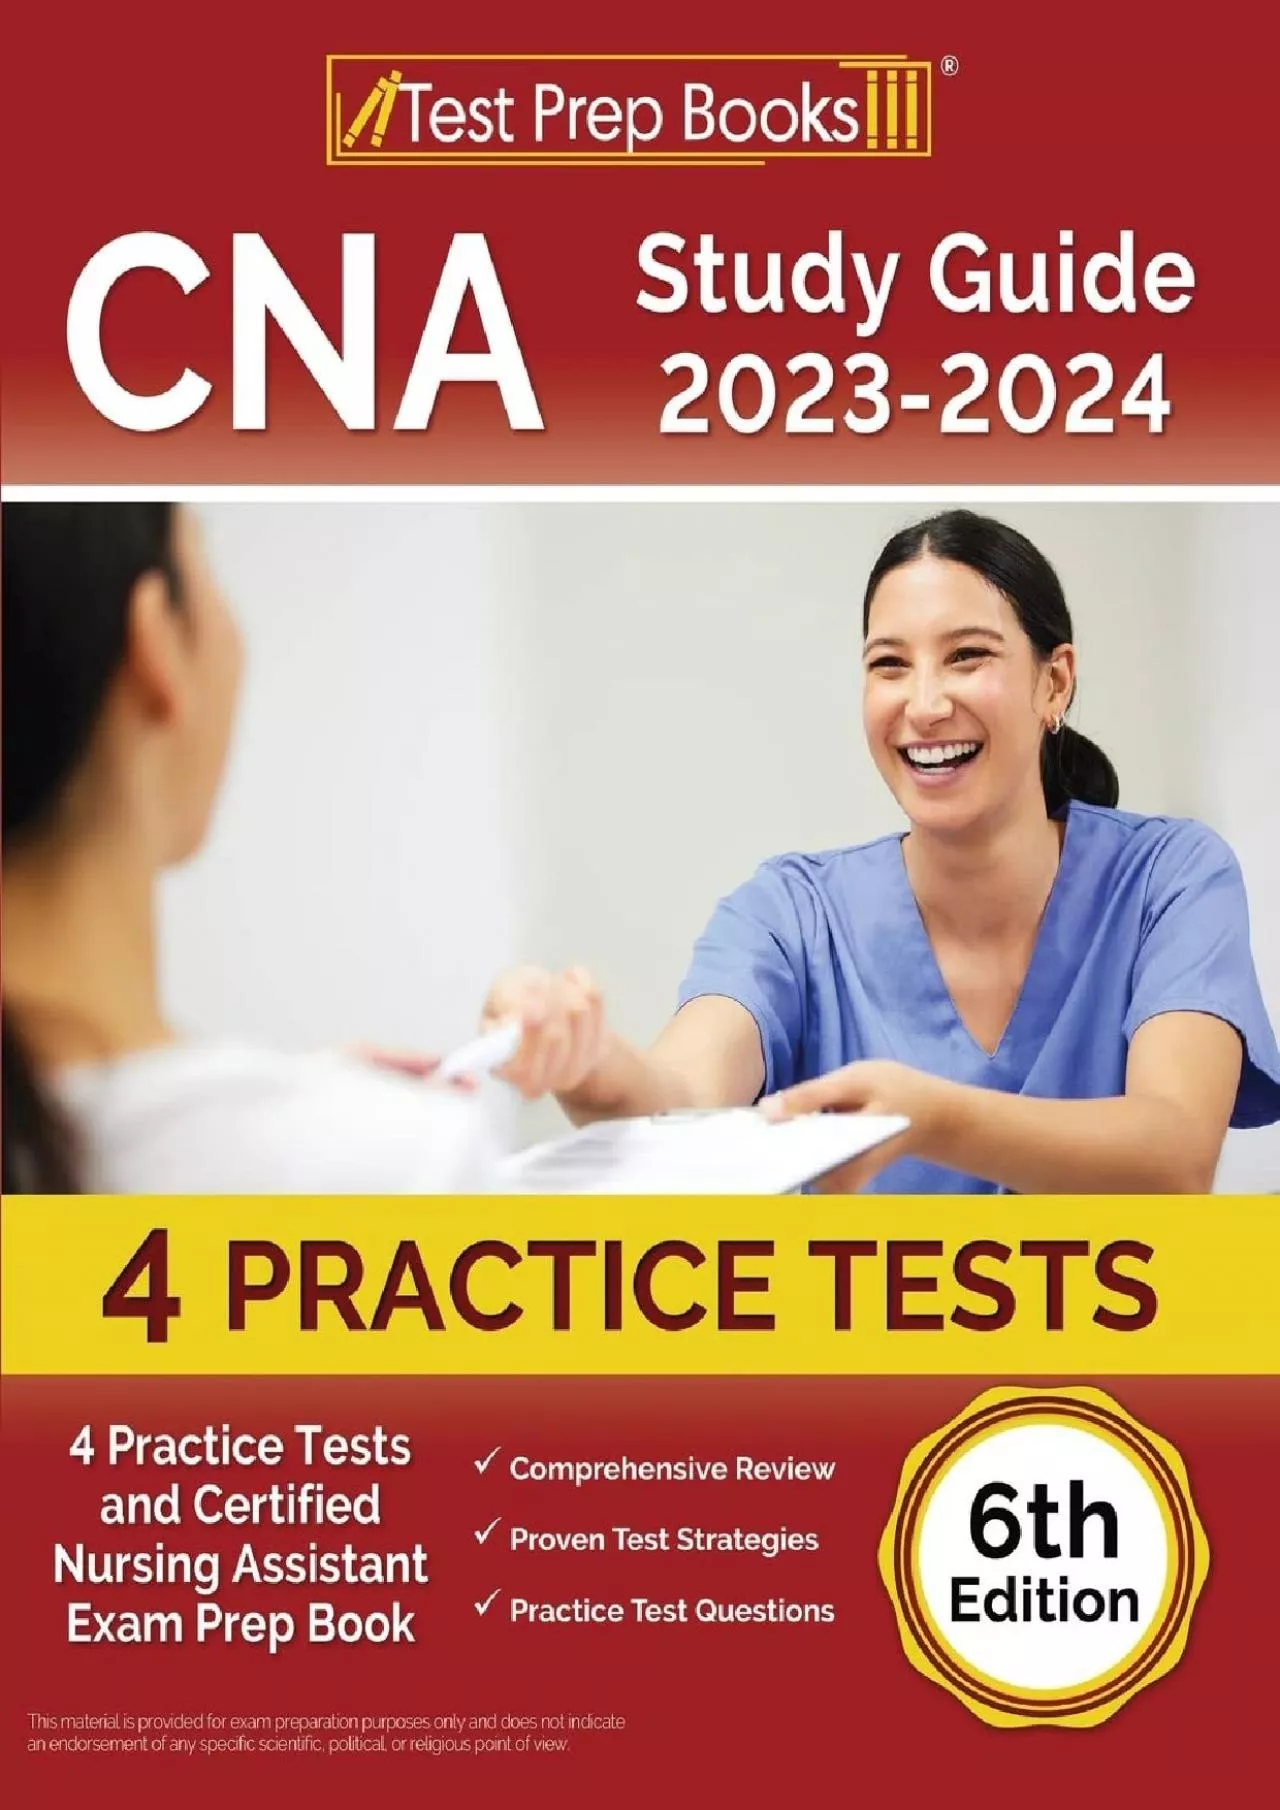 [DOWNLOAD] CNA Study Guide 2023-2024: 4 Practice Tests and Certified Nursing Assistant